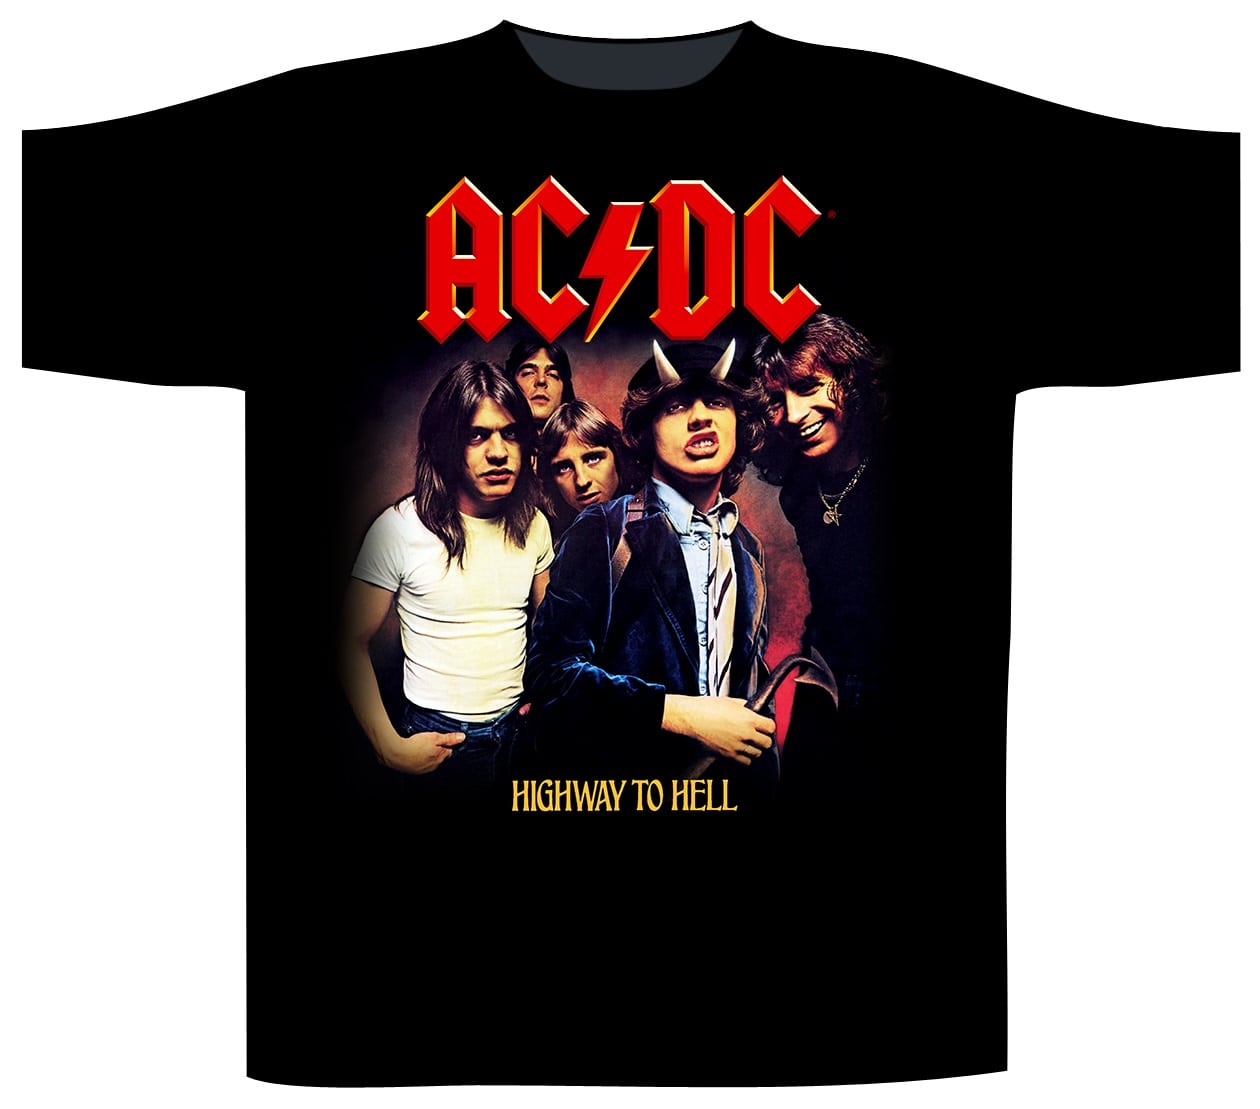 Acdc highway to hell. AC DC Highway to Hell футболка. AC DC Highway to Hell обложка. Мерч АС ДС. Футболка с группой AC DC.